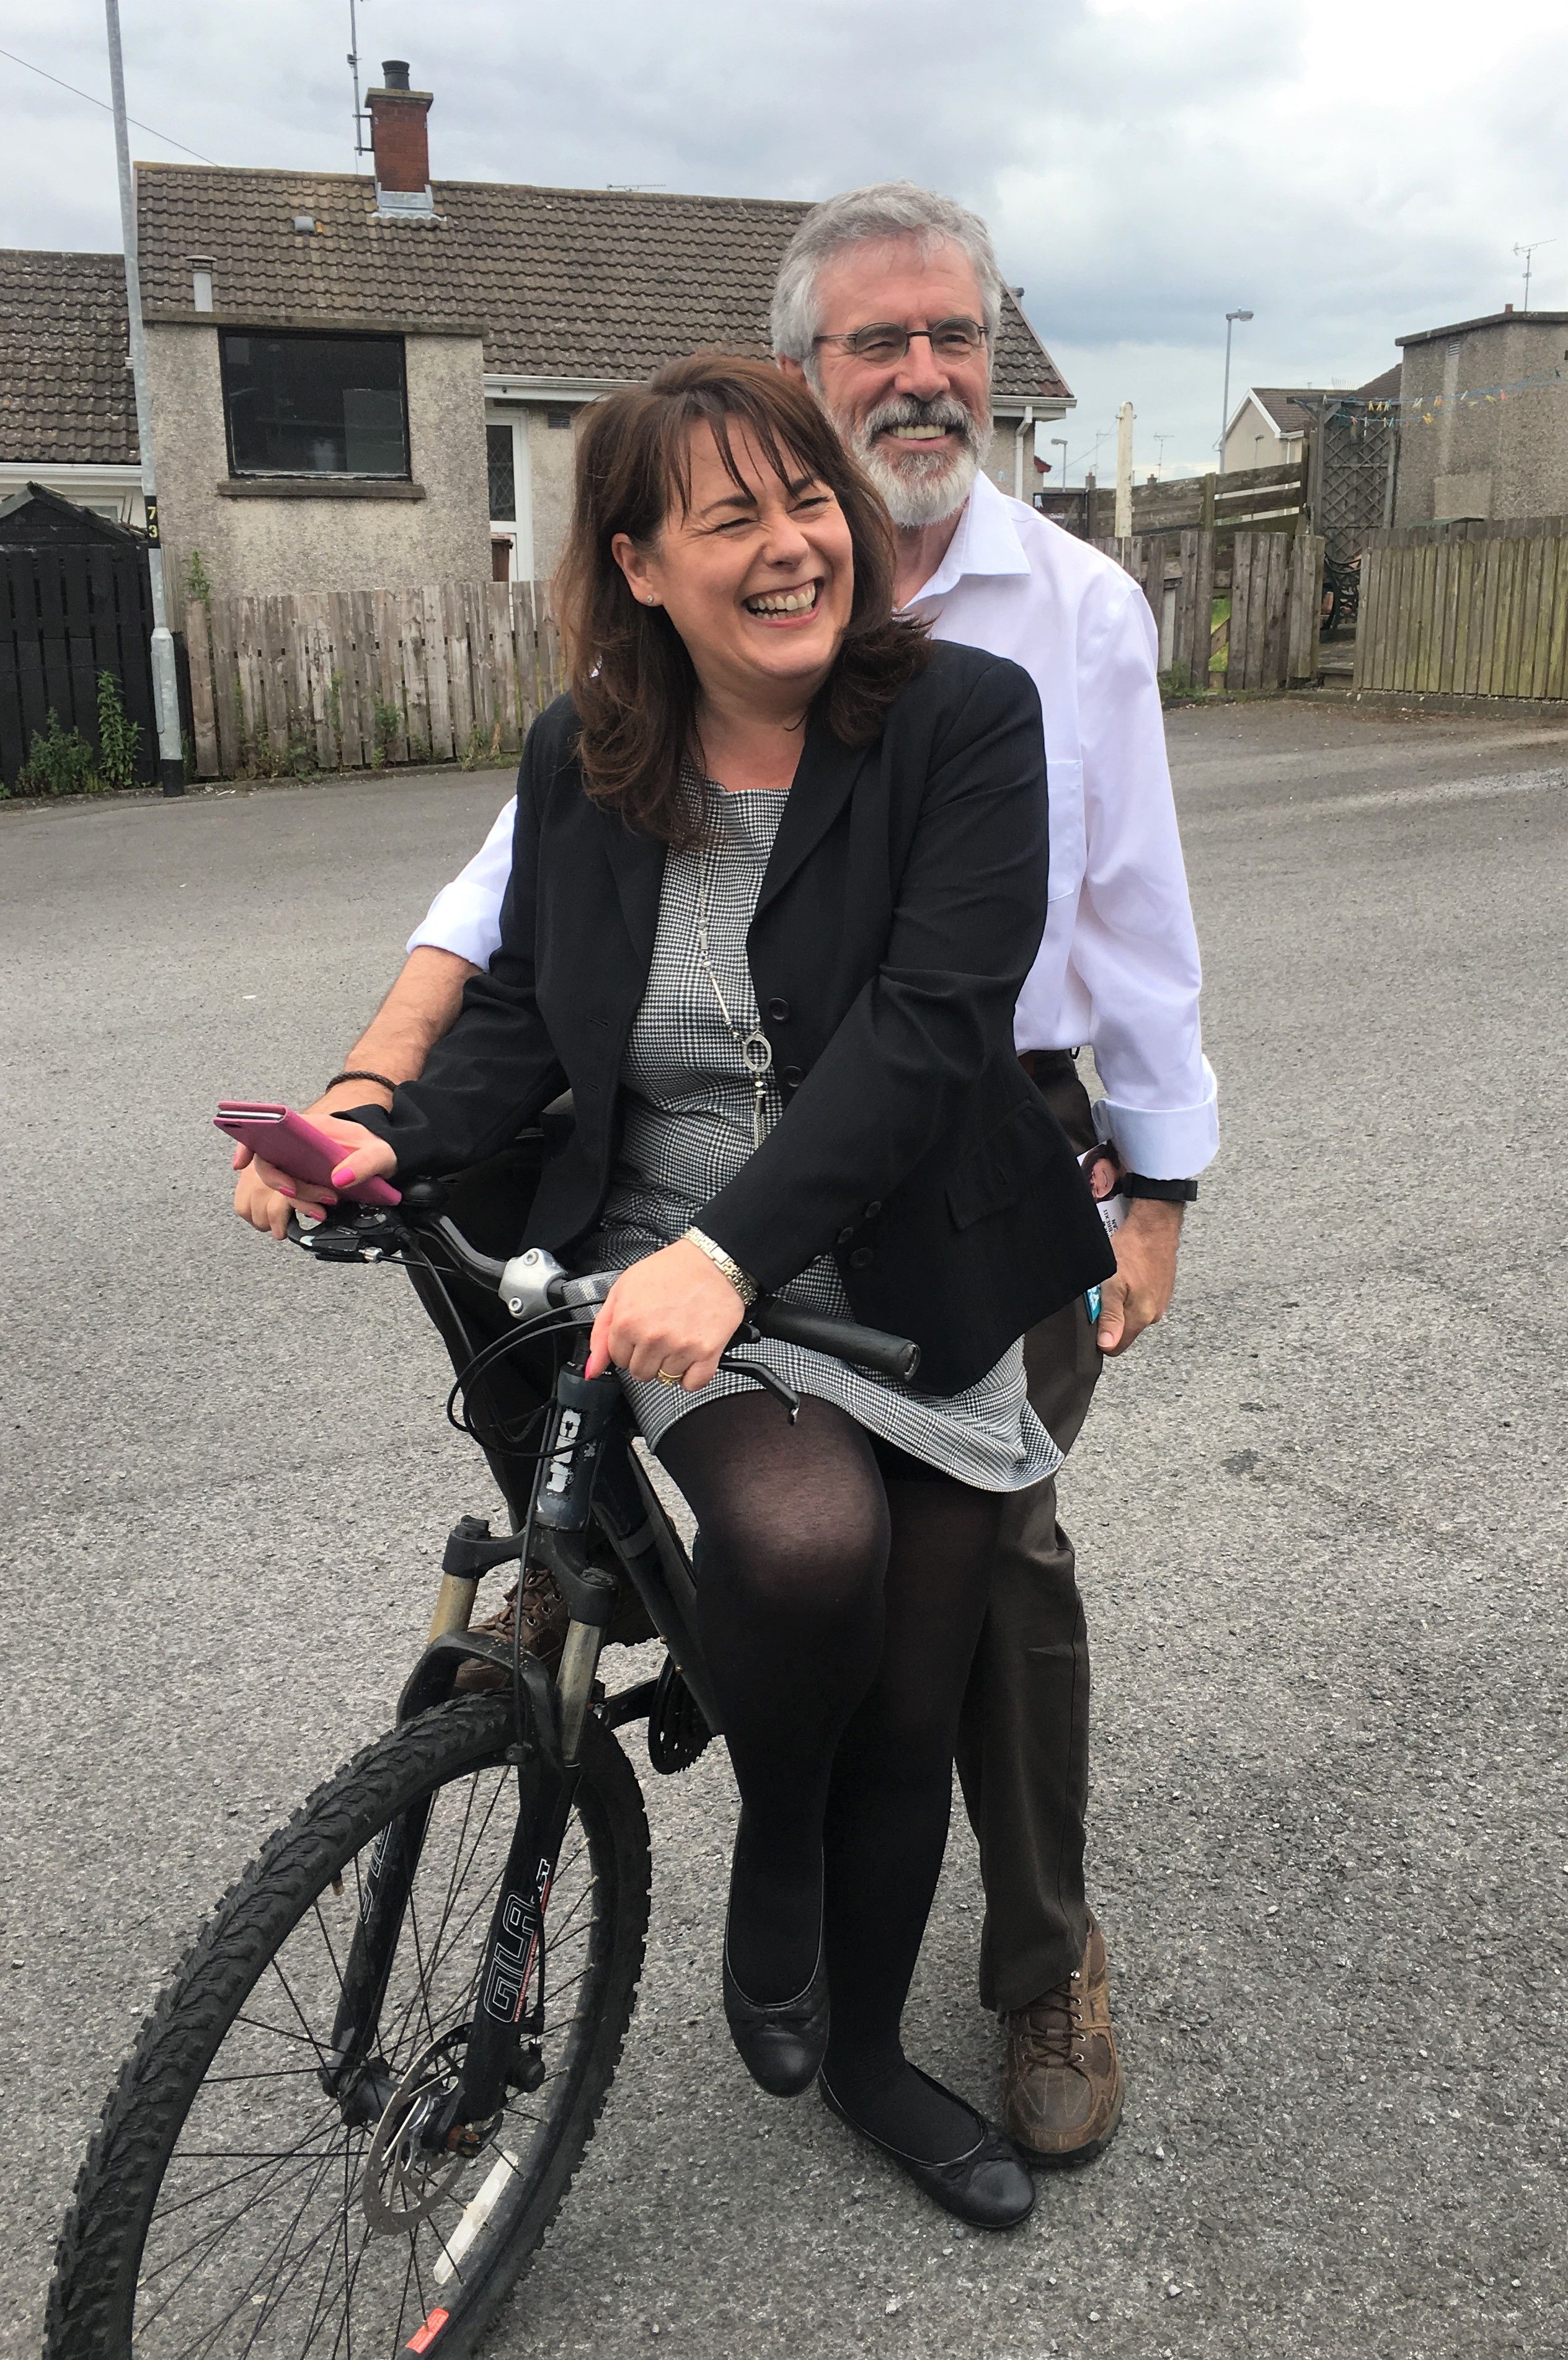 SADDLE-SORE: Gerry Adams on his trusty bike with party colleague Michelle Gildernew